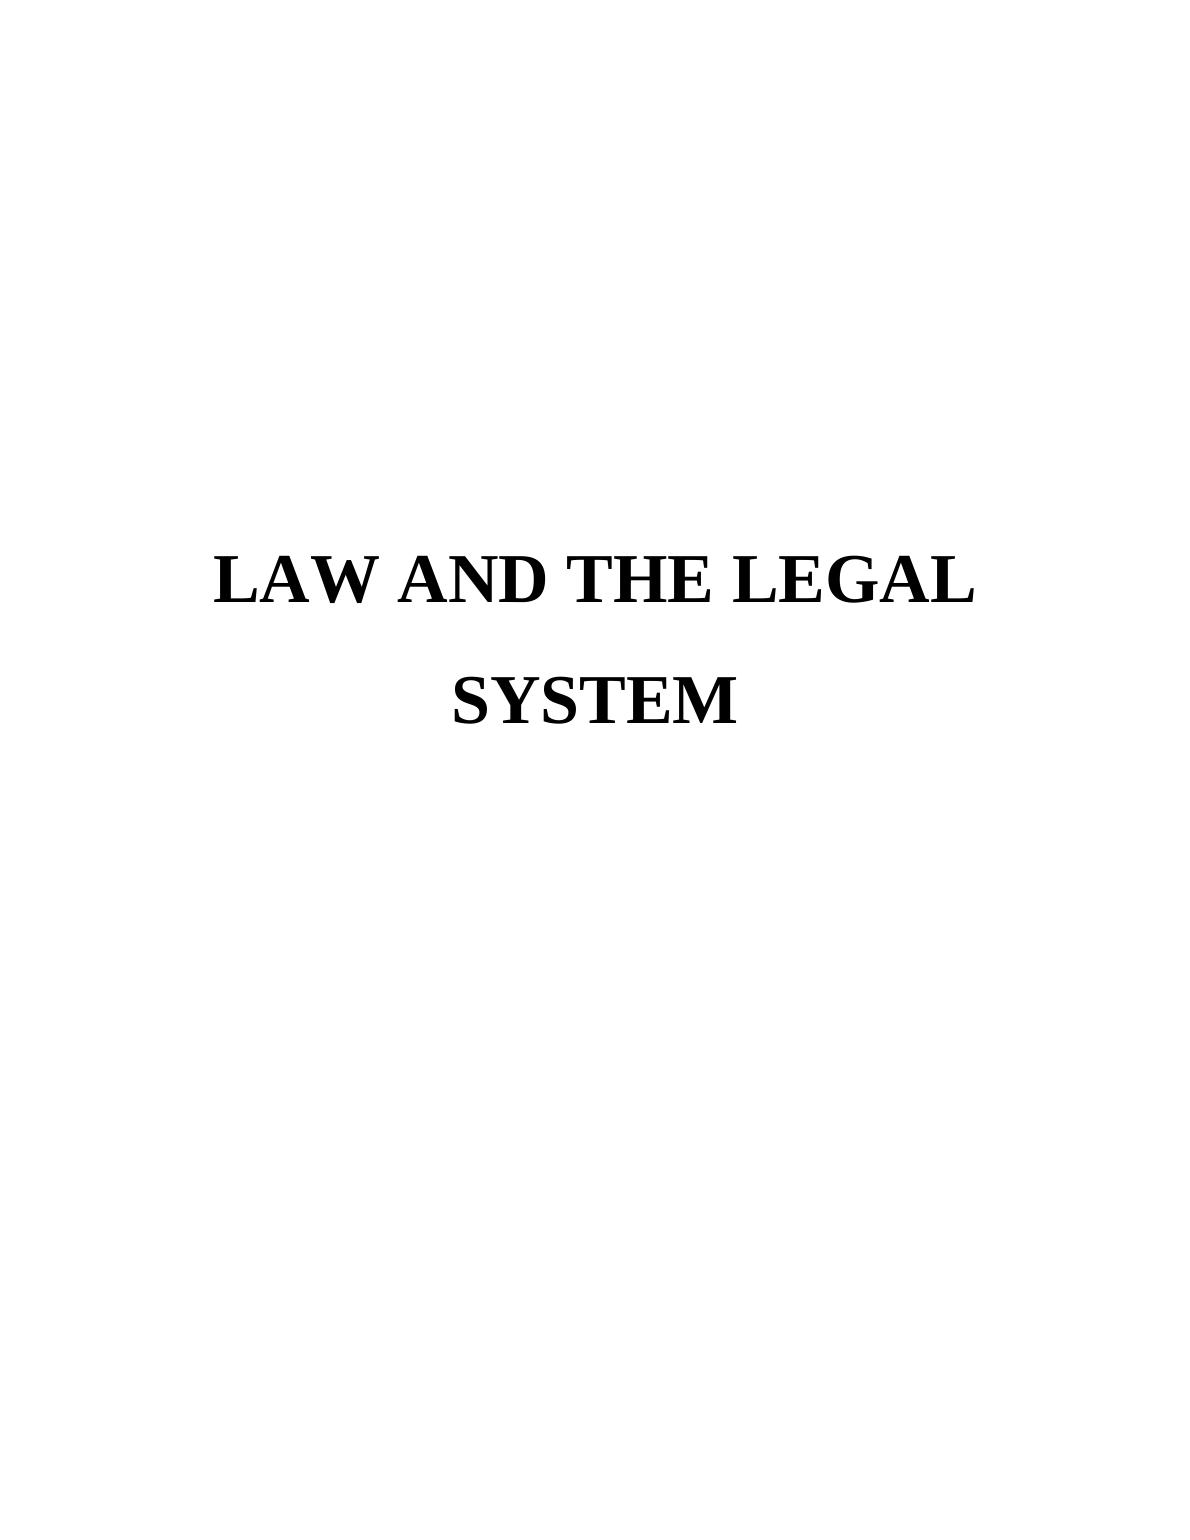 Law and the Legal System: Assignment_1